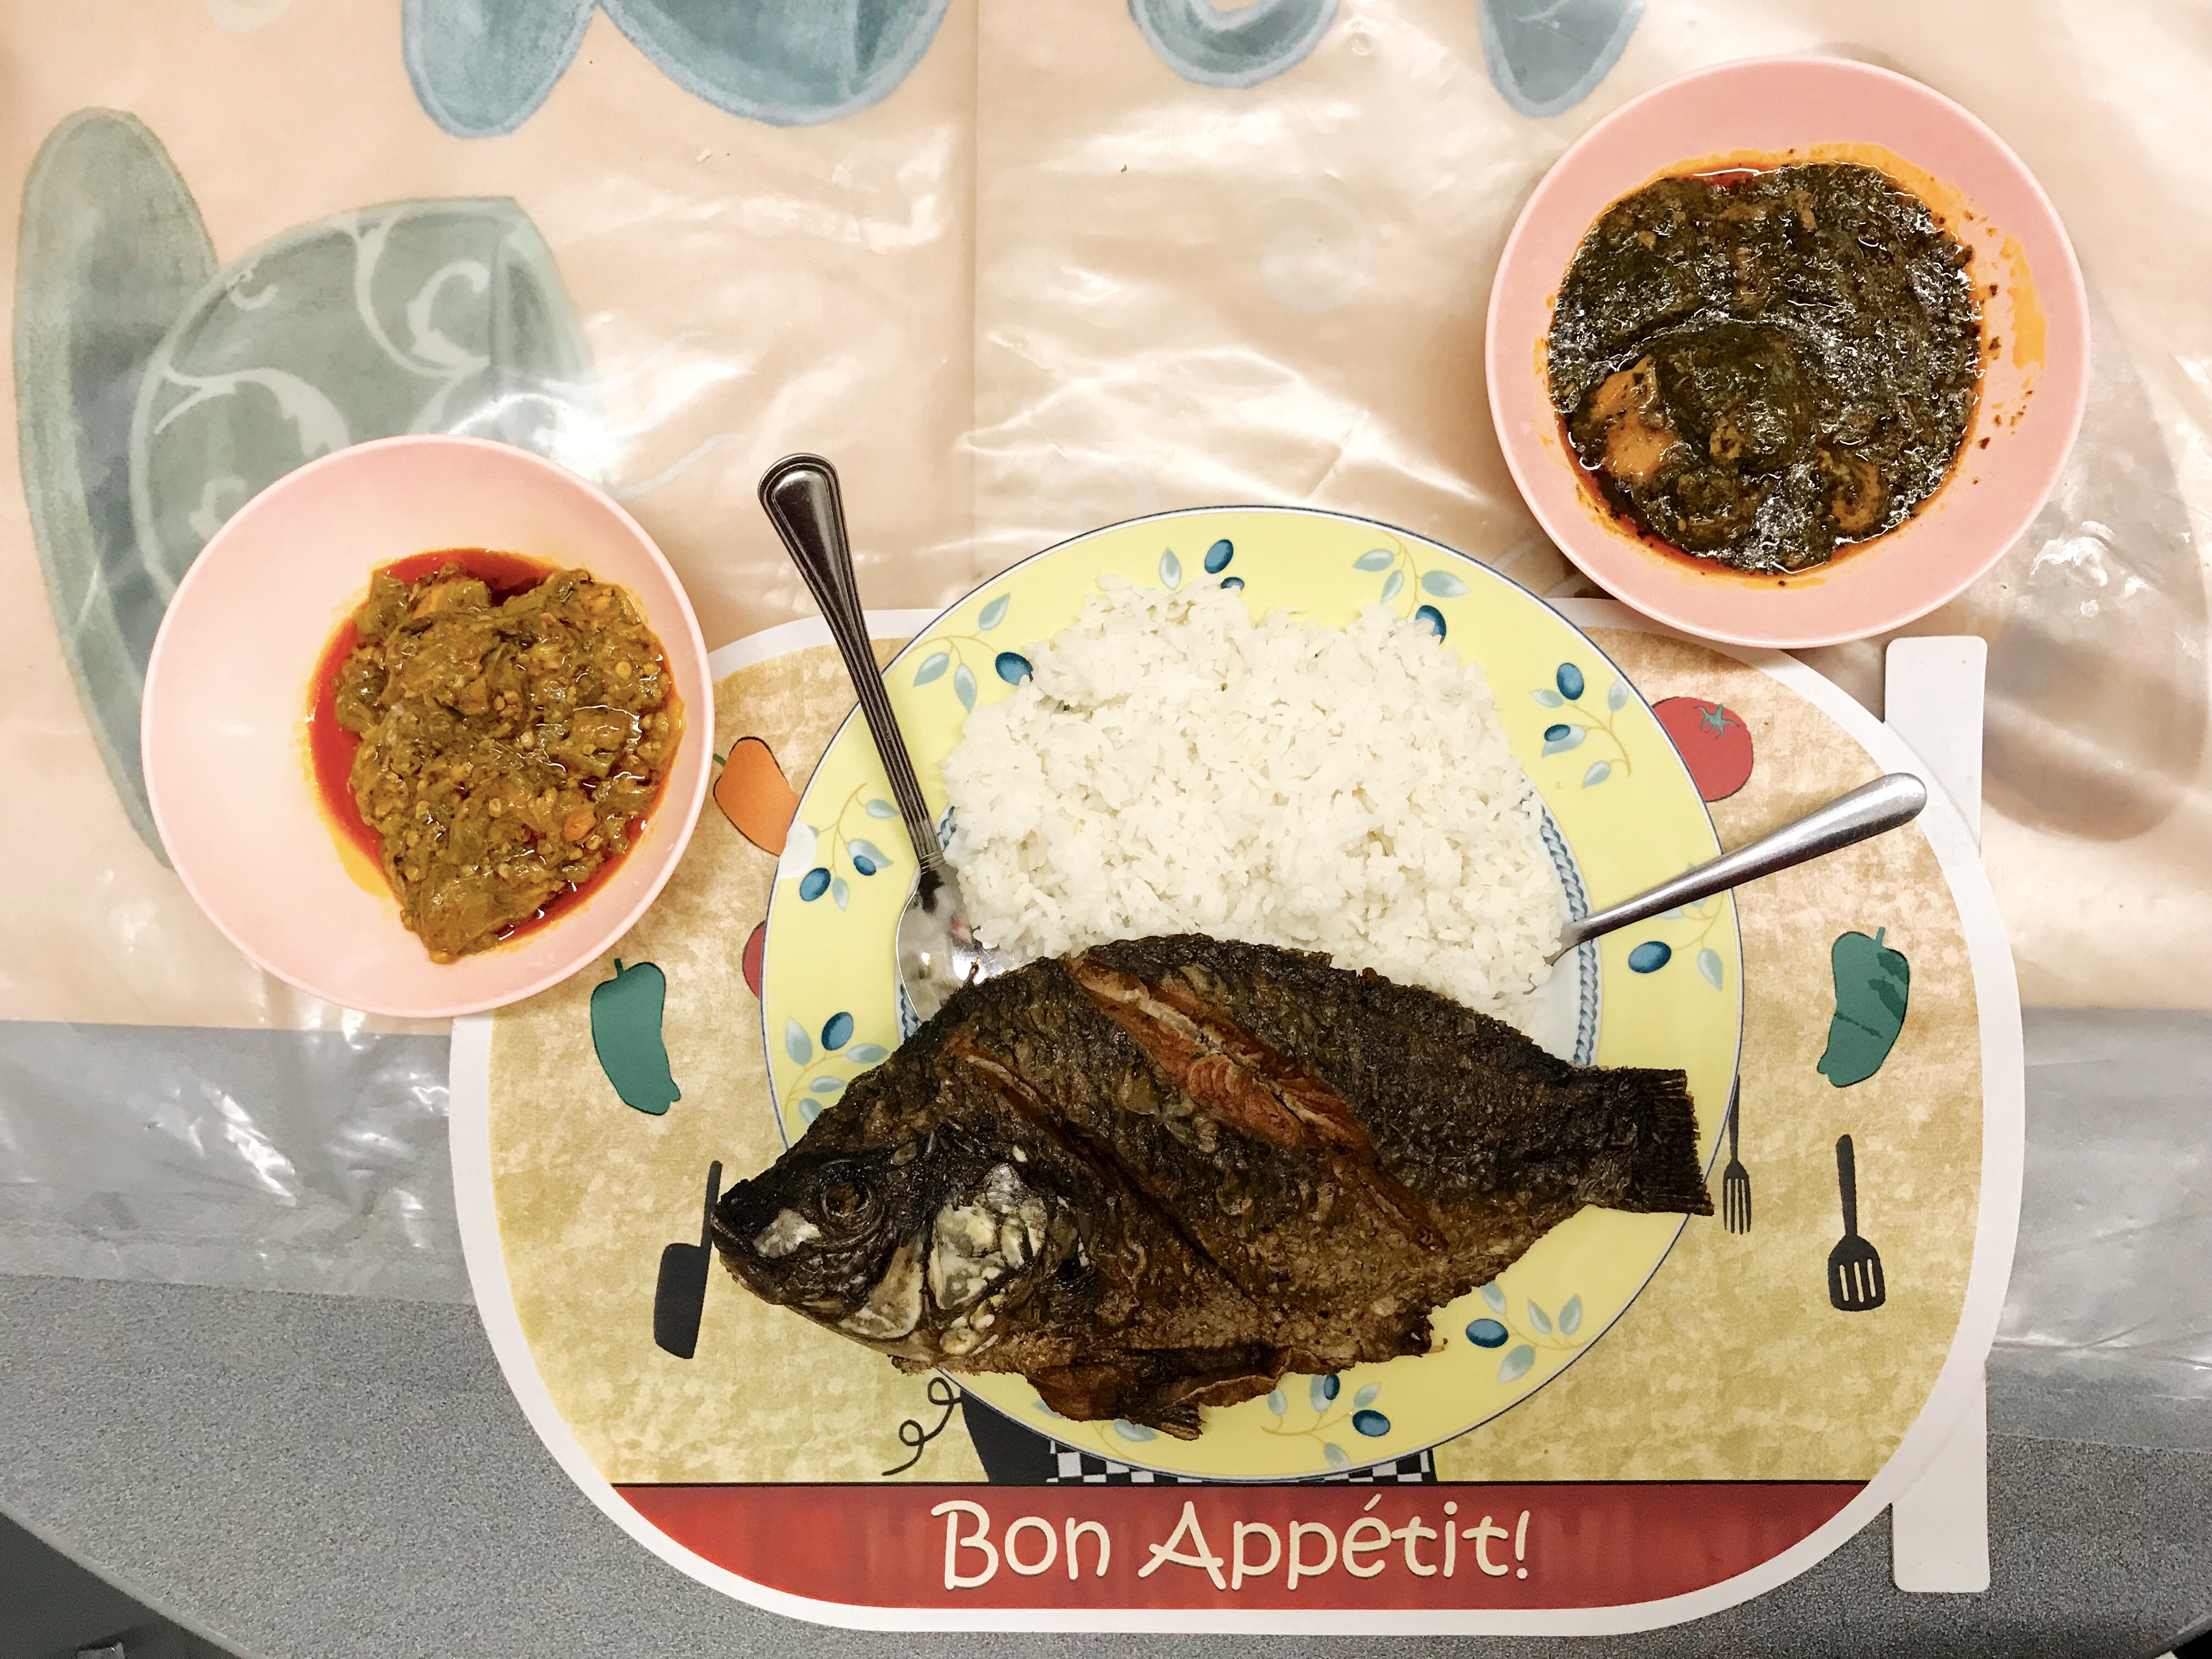 A whole fried tilapia sits on a plate on a pile of white rice. Underneath is a placemat that reads “Bon Appetit!” Two pink bowls hold side dishes.